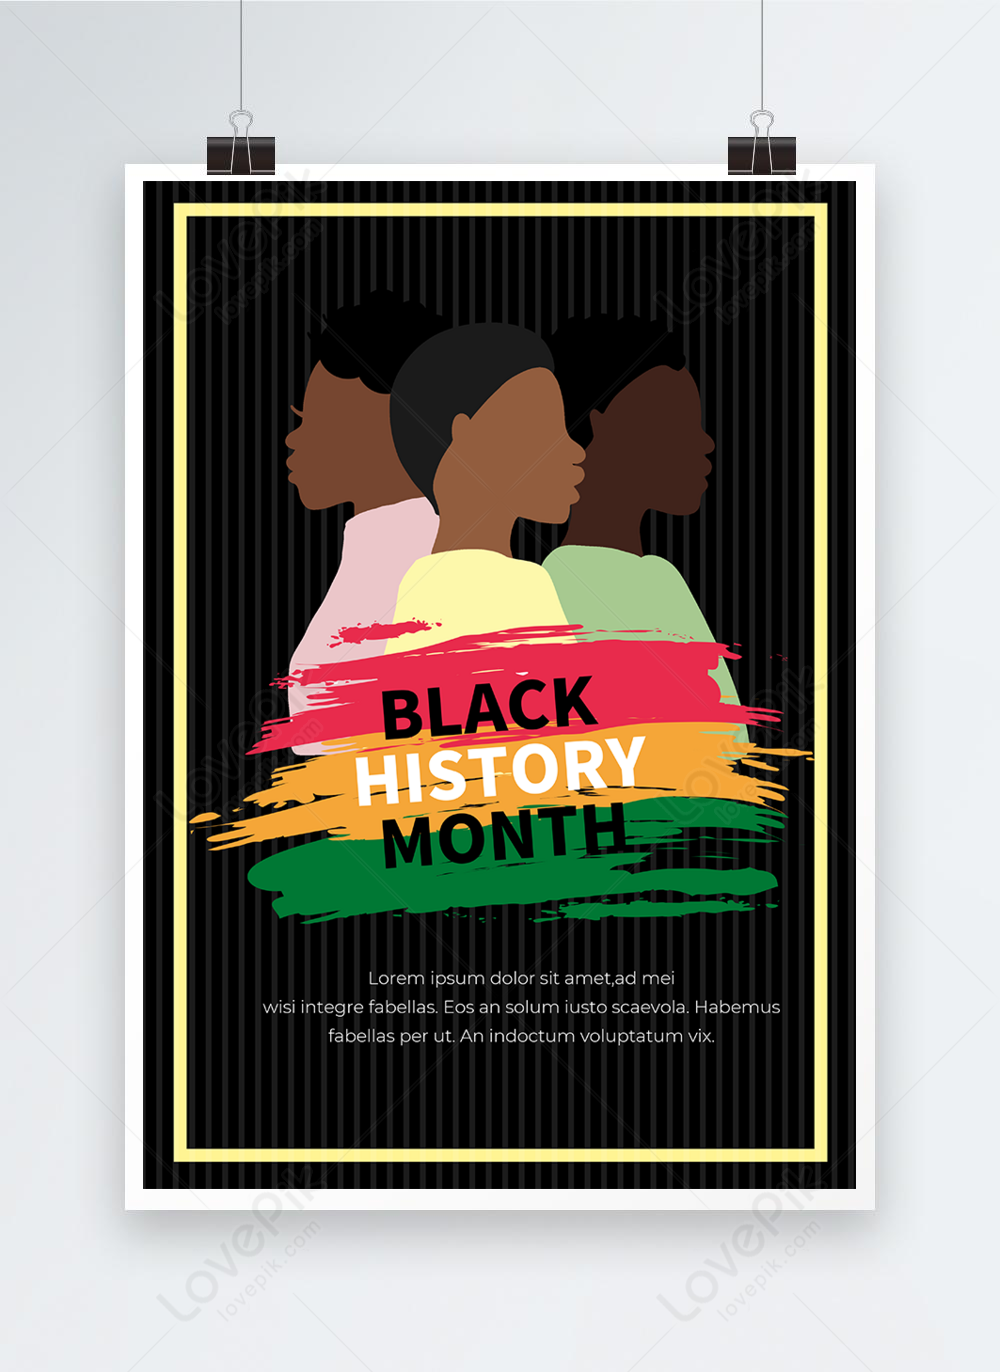 Border illustration character black history month template image